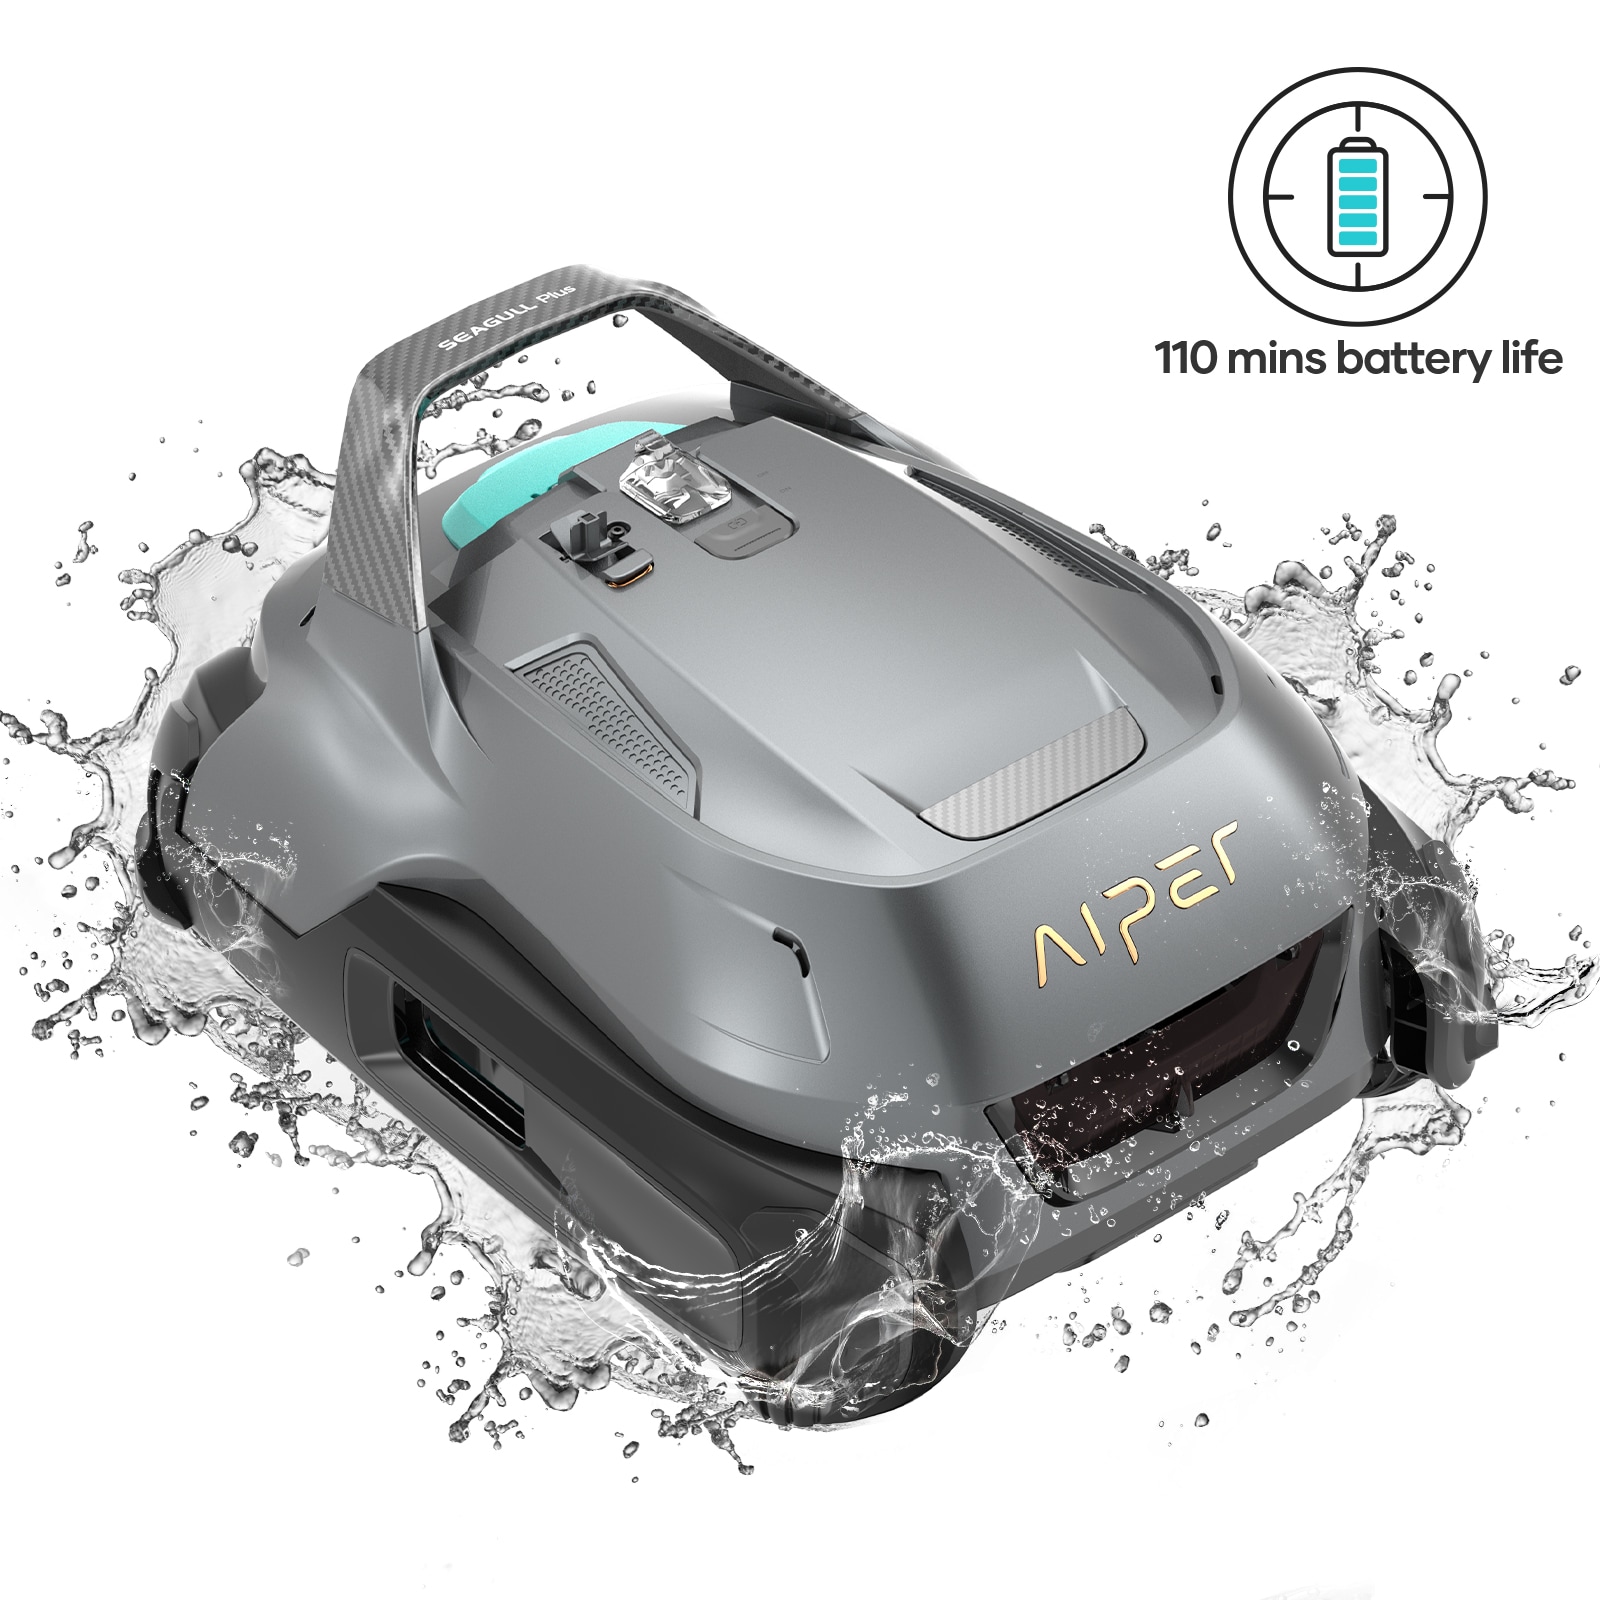 Aiper  The World's Best Cordless Robotic Pool Cleaner